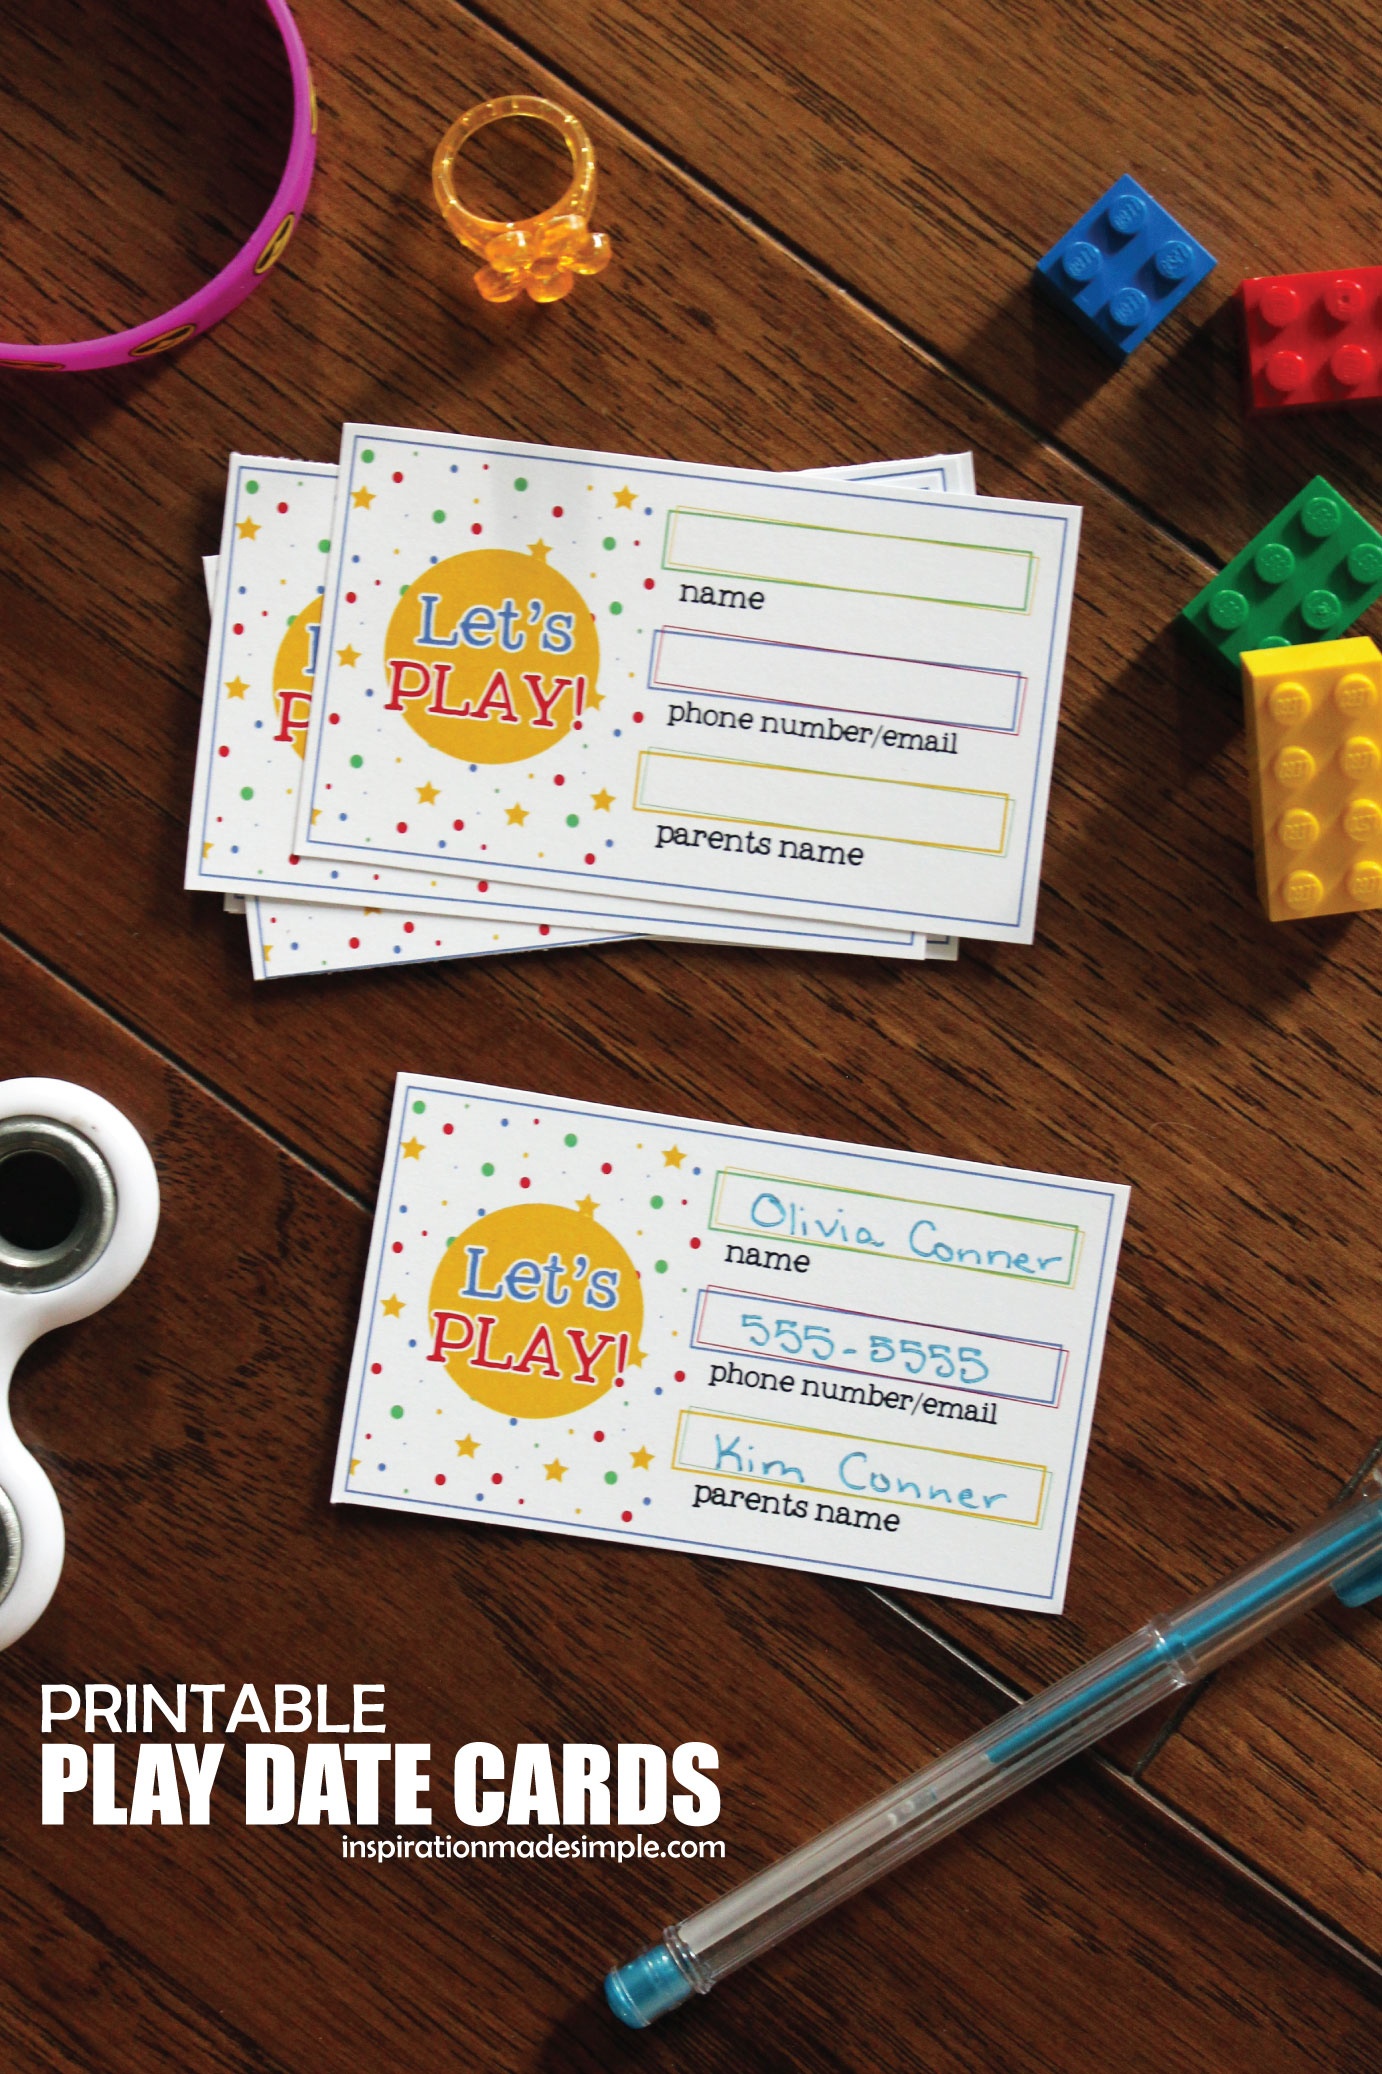 Printable Play Date Cards For Kids - Inspiration Made Simple - Play Date Invitations Free Printable